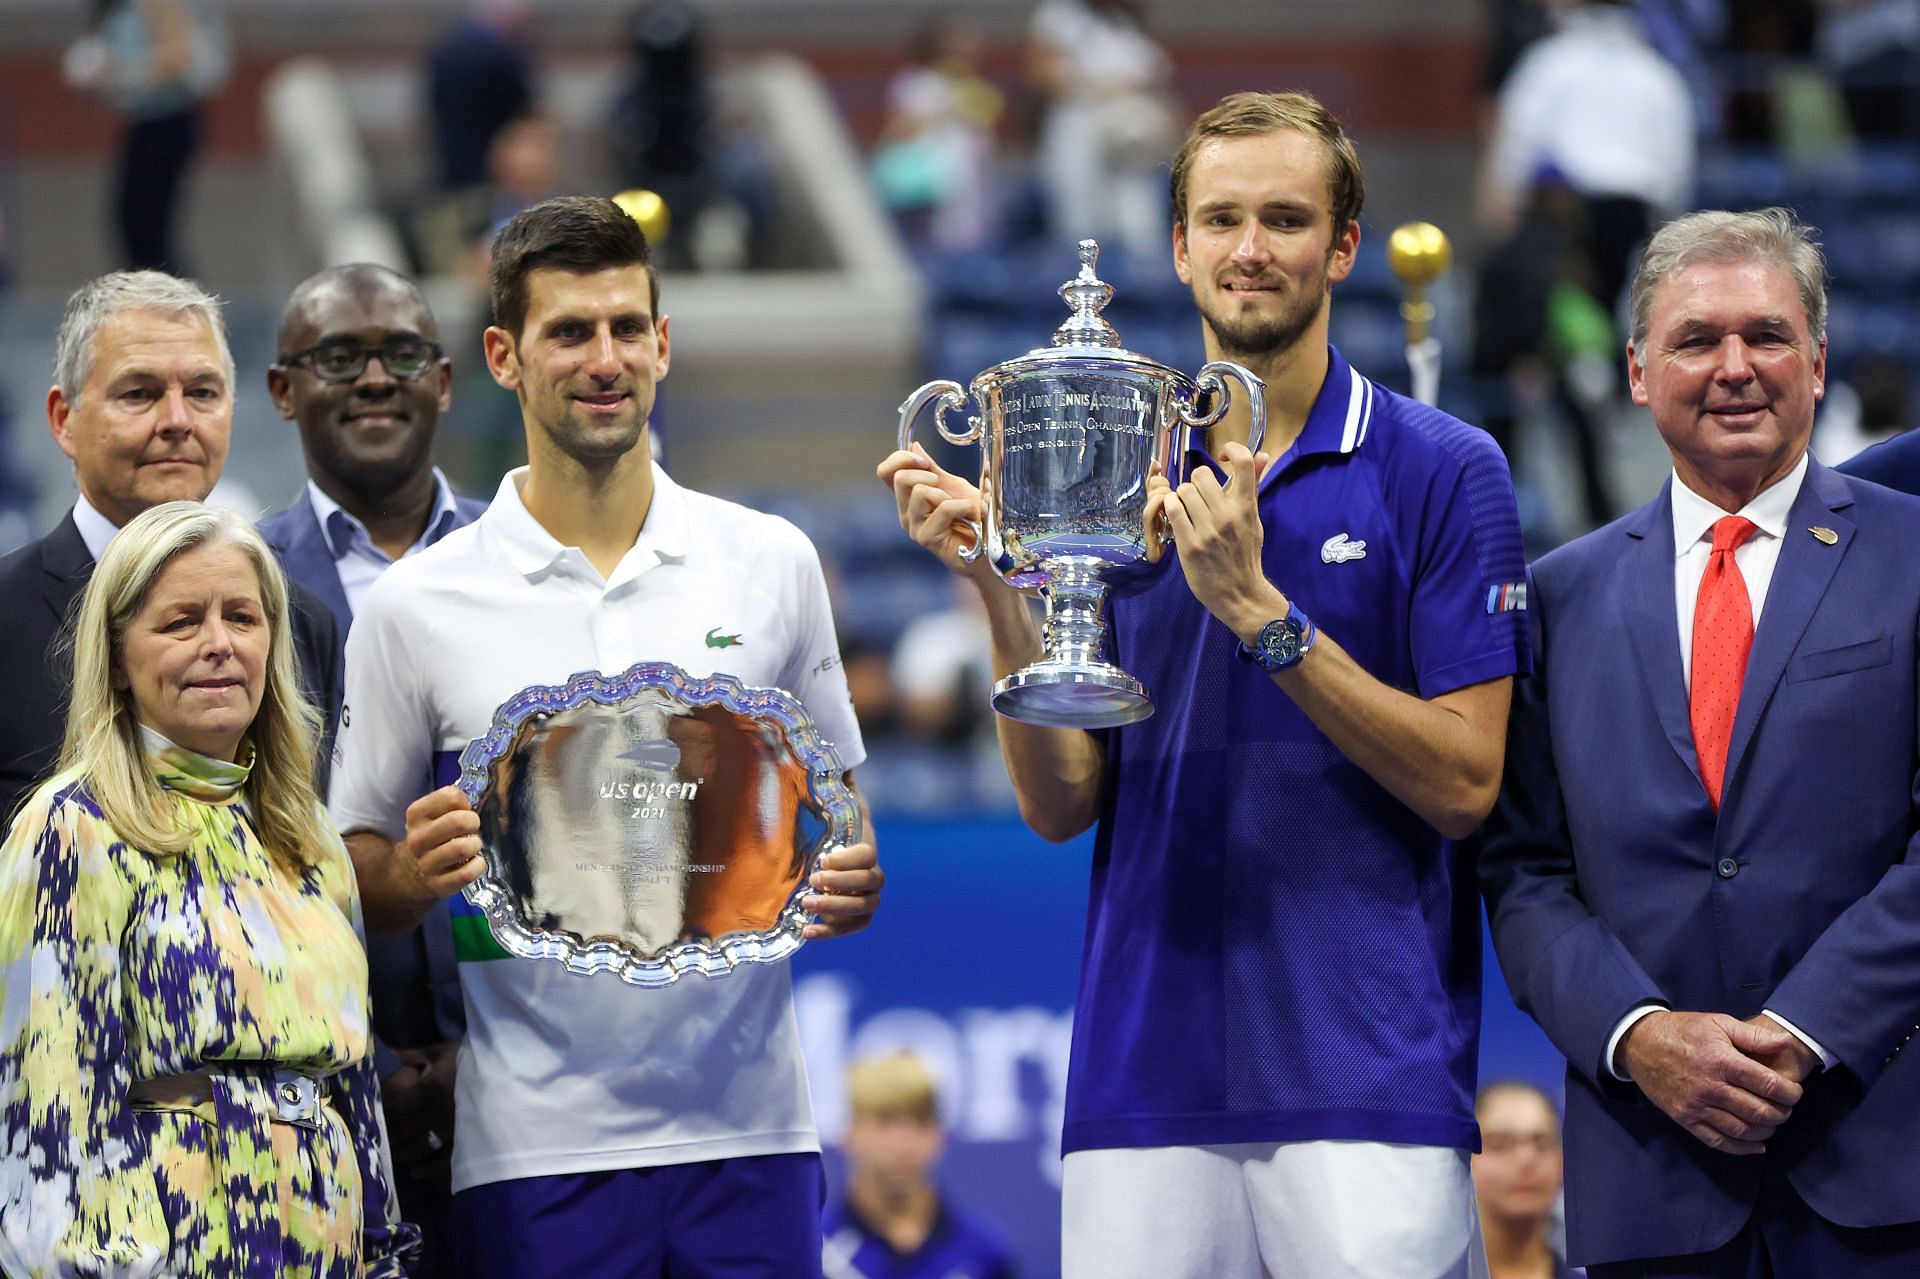 Daniil Medvedev and Novak Djokovic with their respective trophies at the 2021 US Open